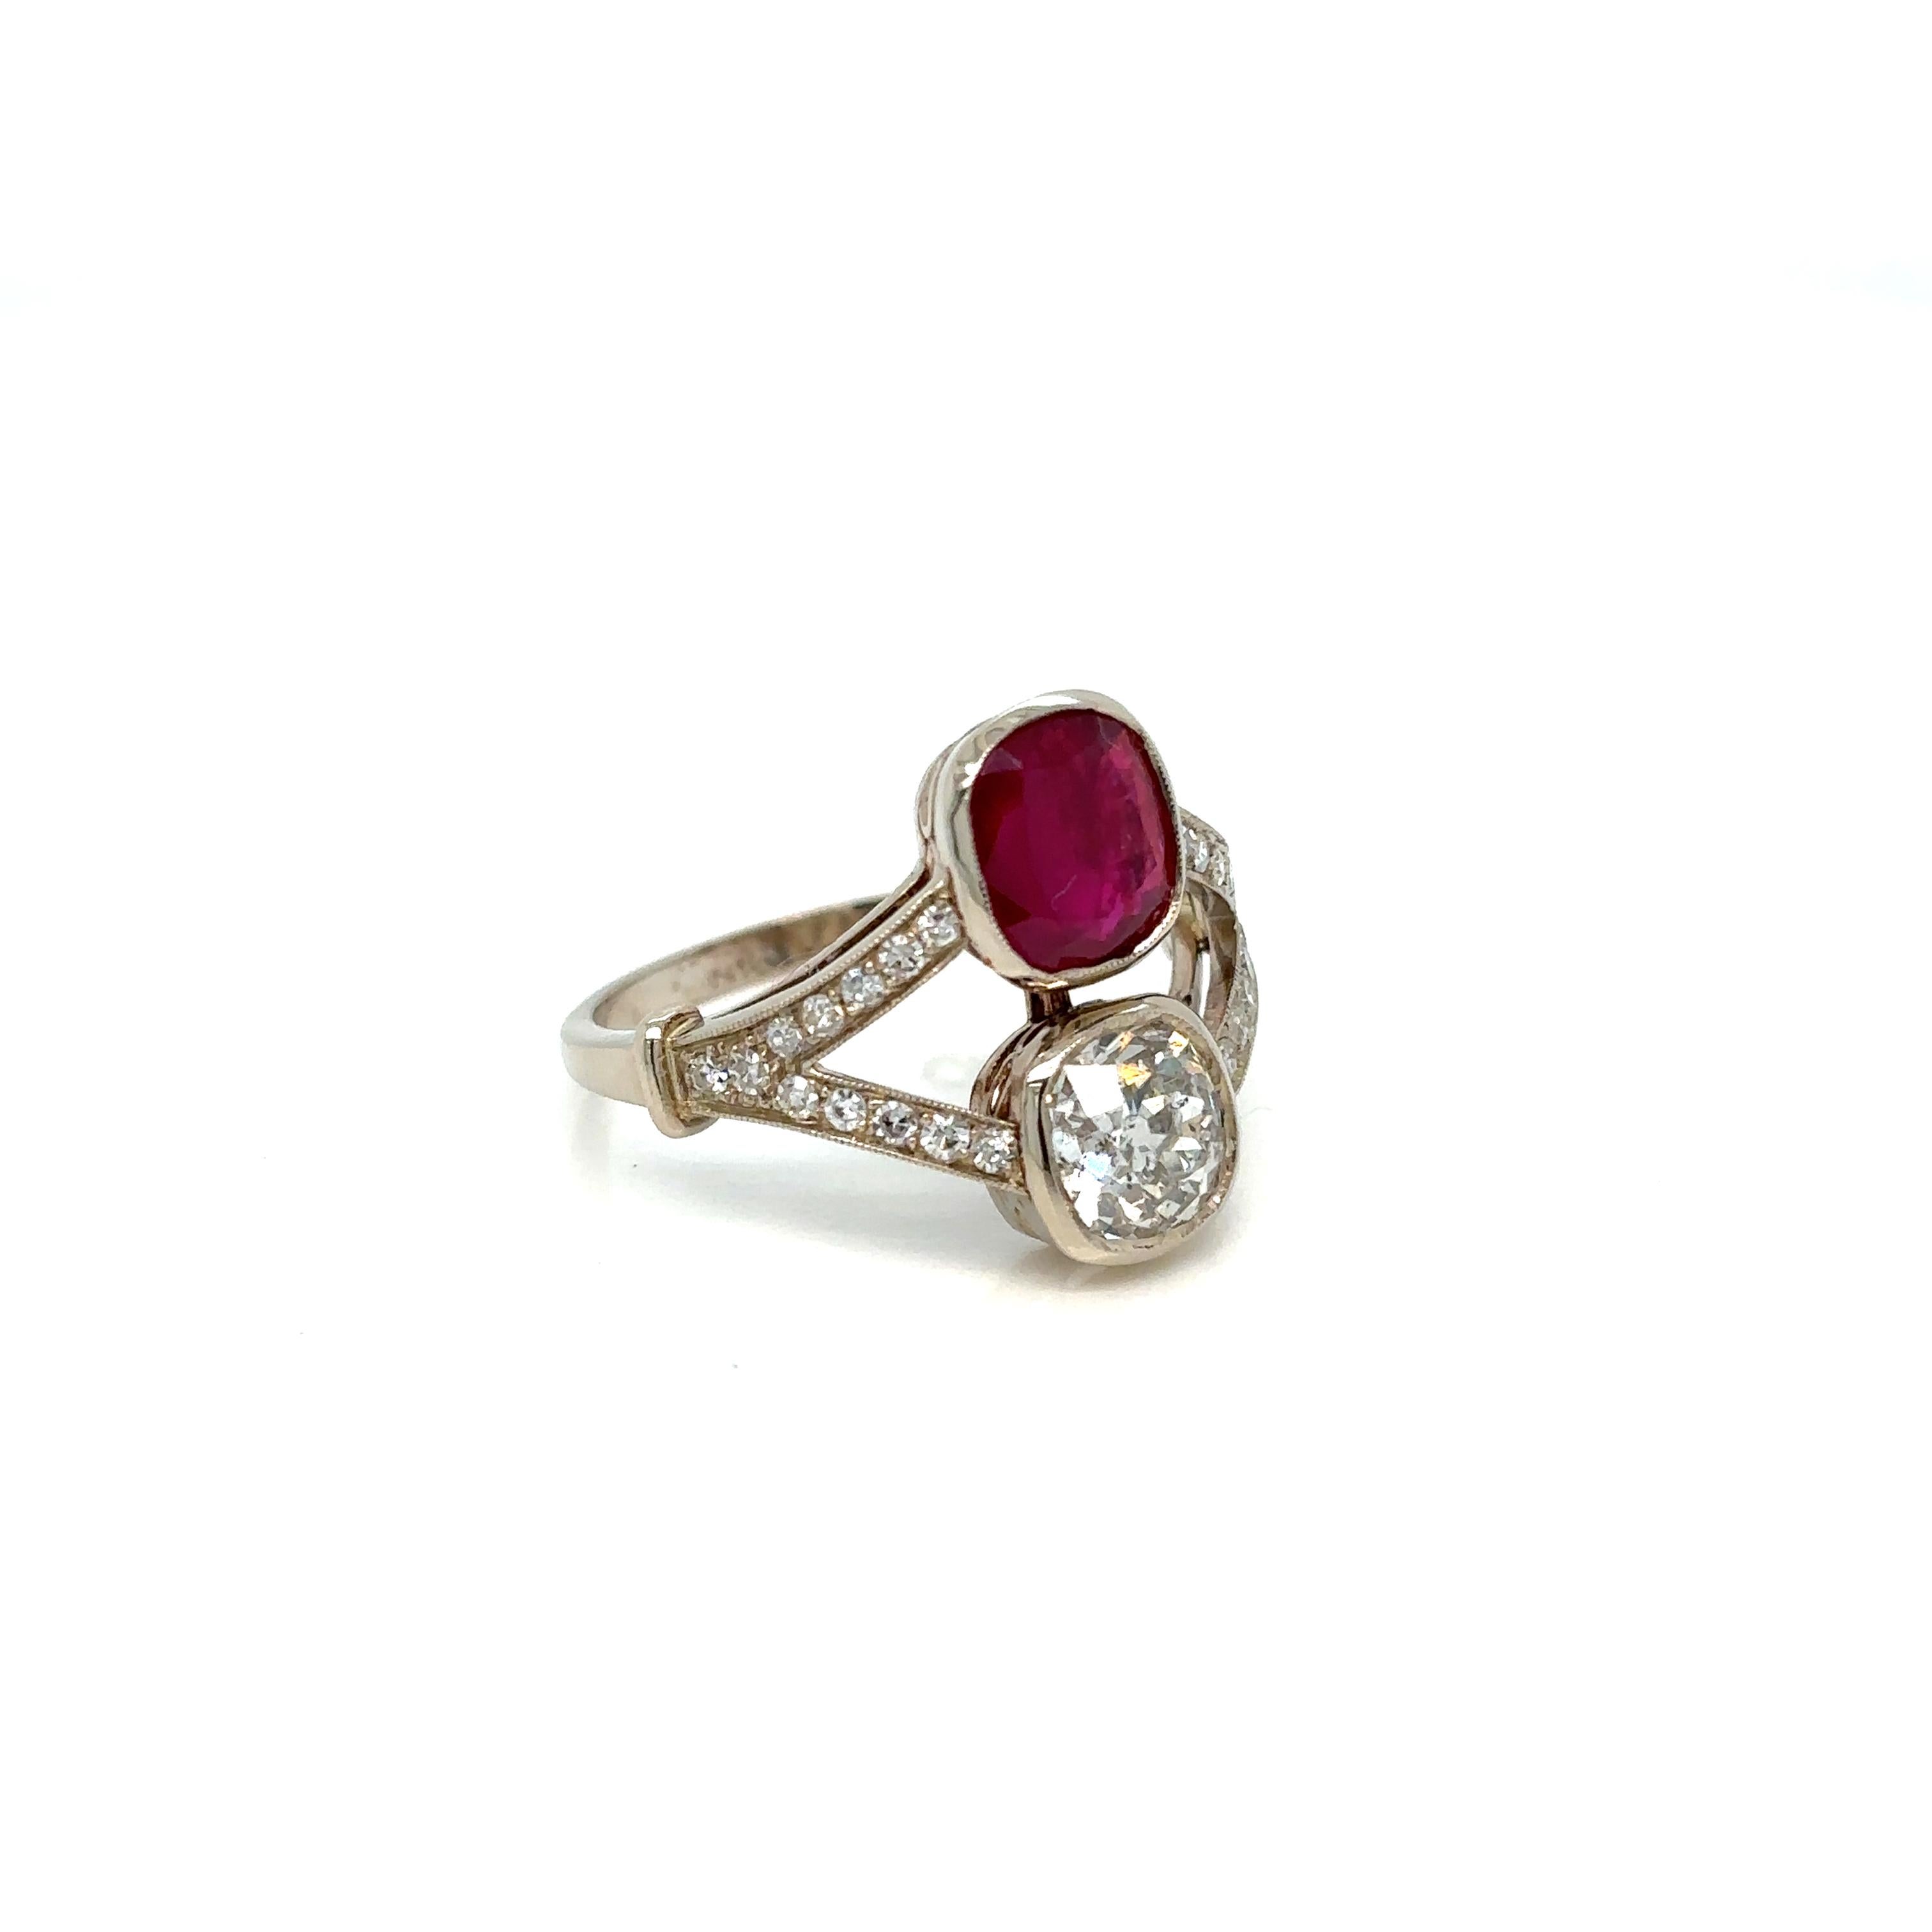 This Beautiful Authentic Victorian 18k gold 'Vous et Moi' ring is set in the center with one Certified vivid Natural unheated Ruby, 1.53 ct., and one Sparkling Old mine cut diamond weighing approx. 1.00 ct., graded H color I1.  The mount is enriched